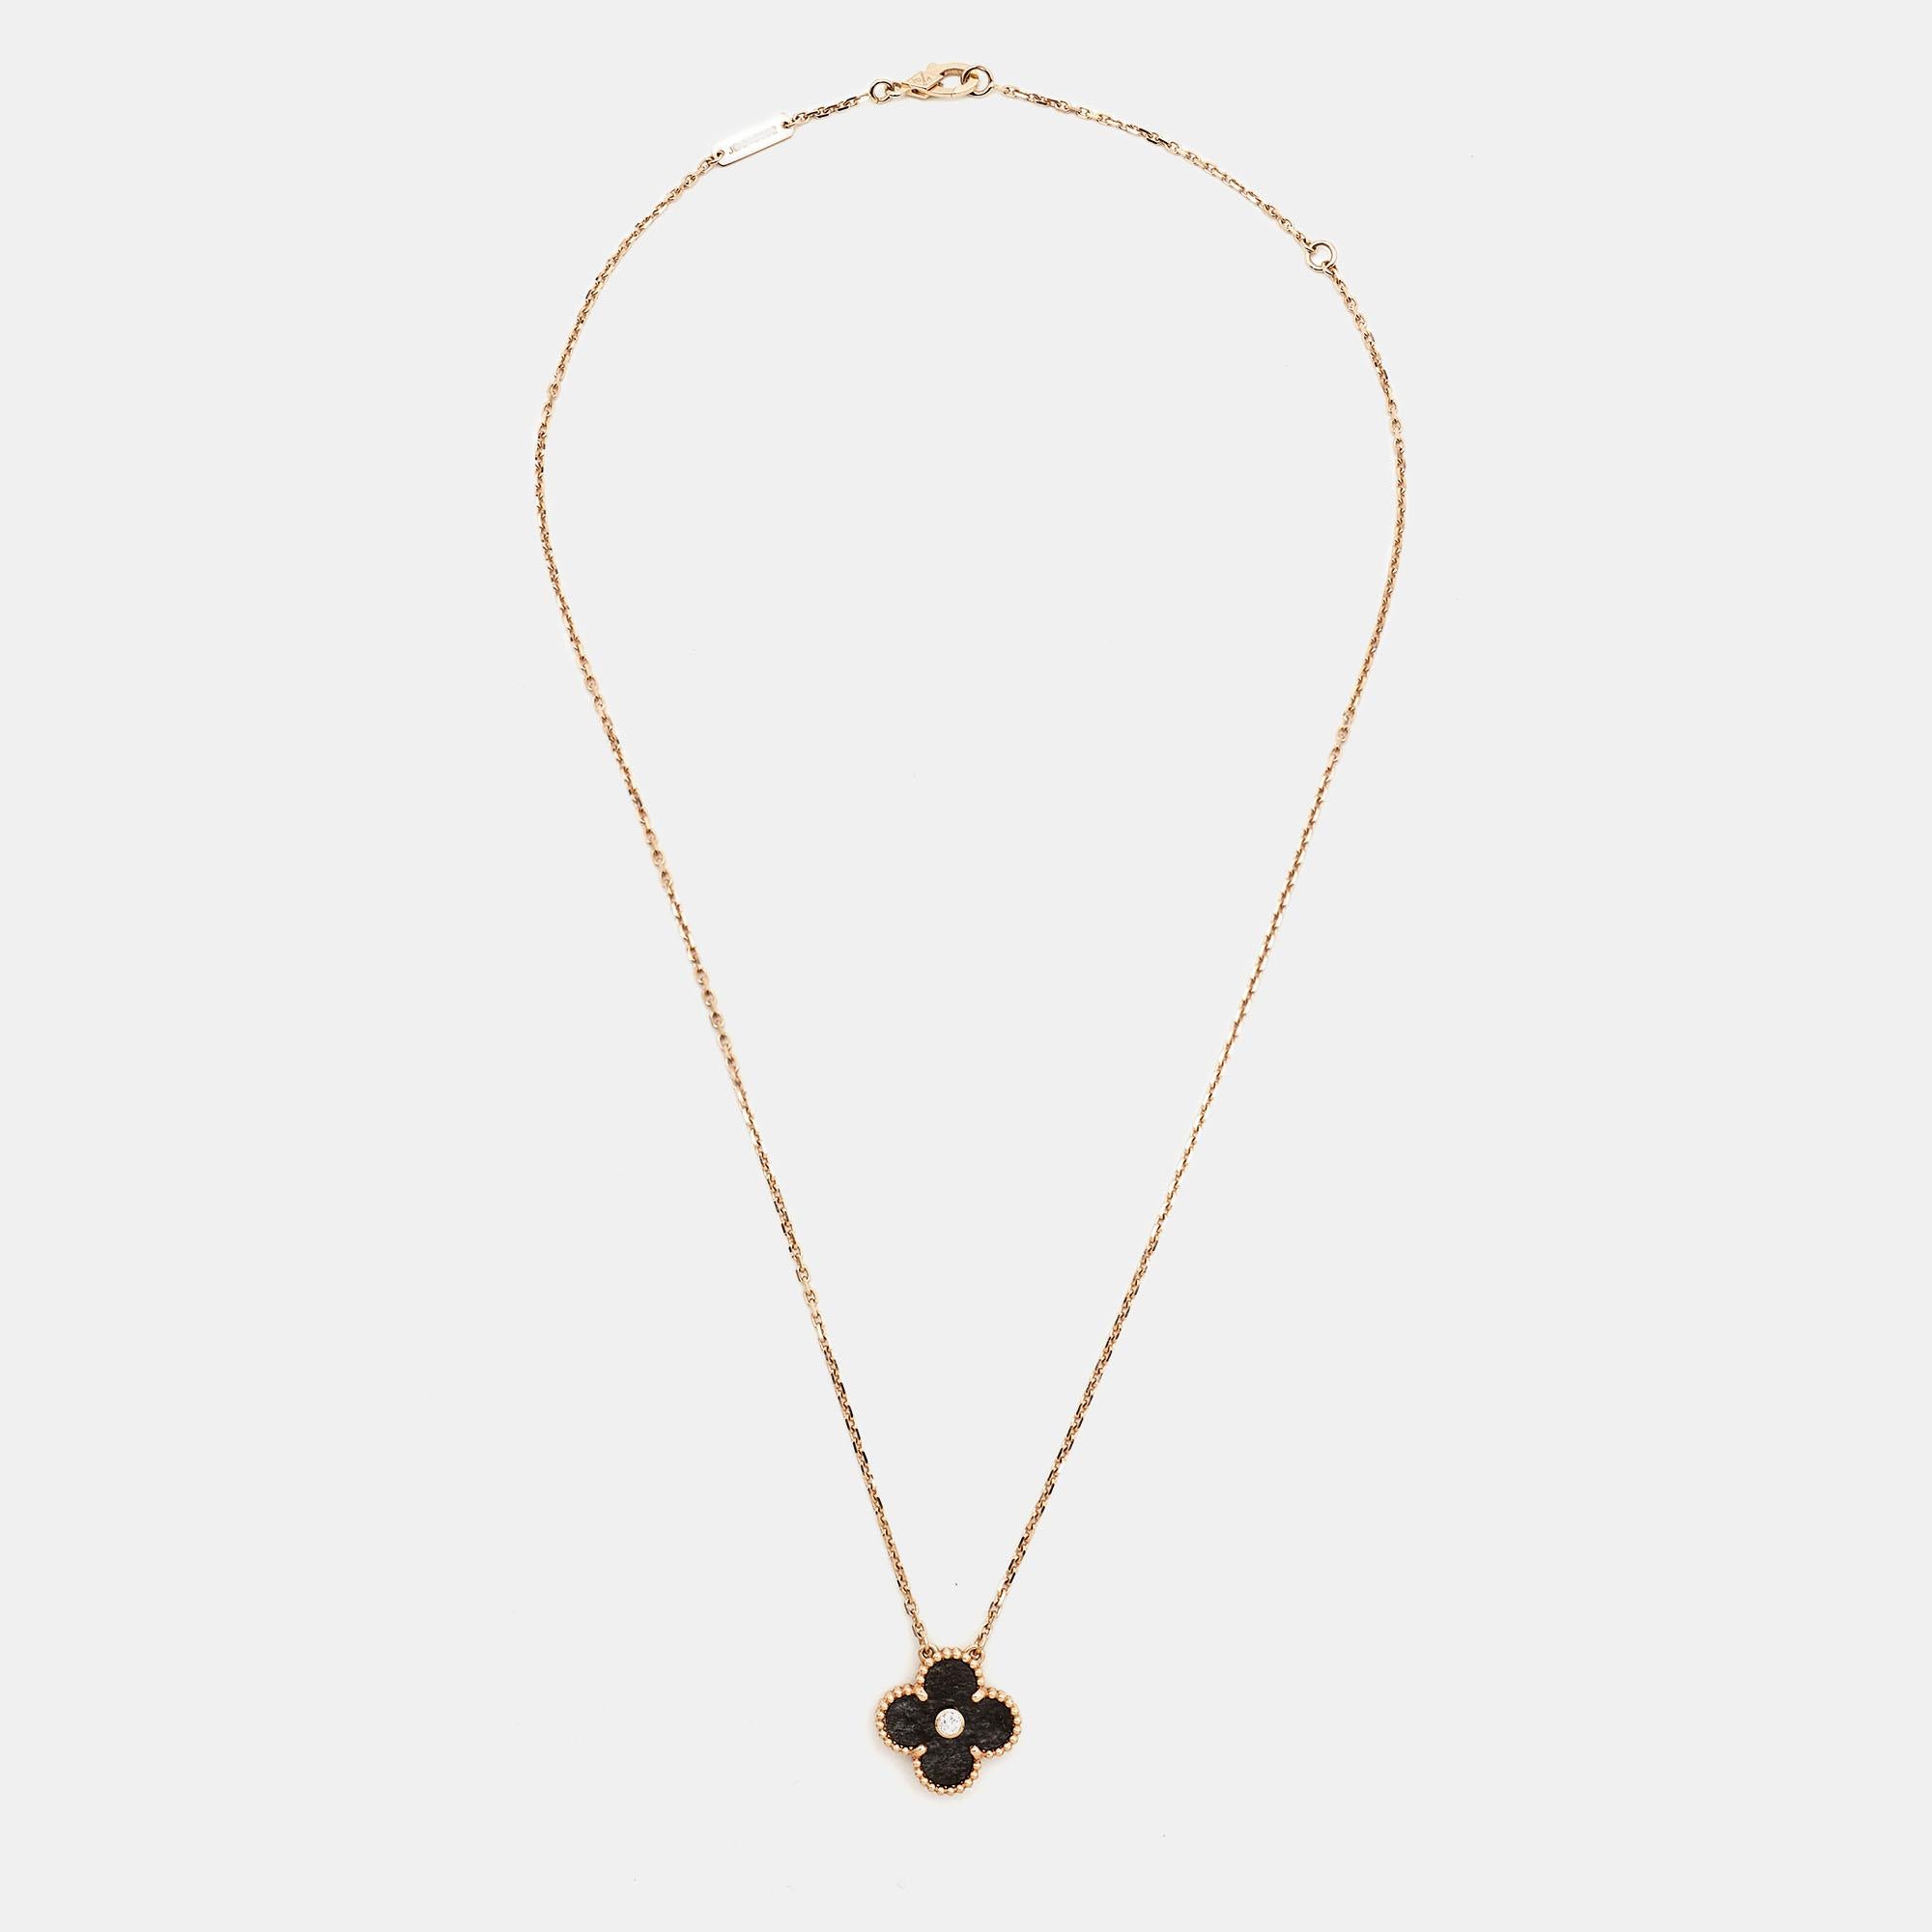 Invest in this opulent Van Cleef and Arpels 2021 Holiday pendant necklace from their iconic Vintage Alhambra collection. The 18k rose gold Alhambra pendant is set with a single diamond stud and held by a chain. A sweet mix of minimalist style and